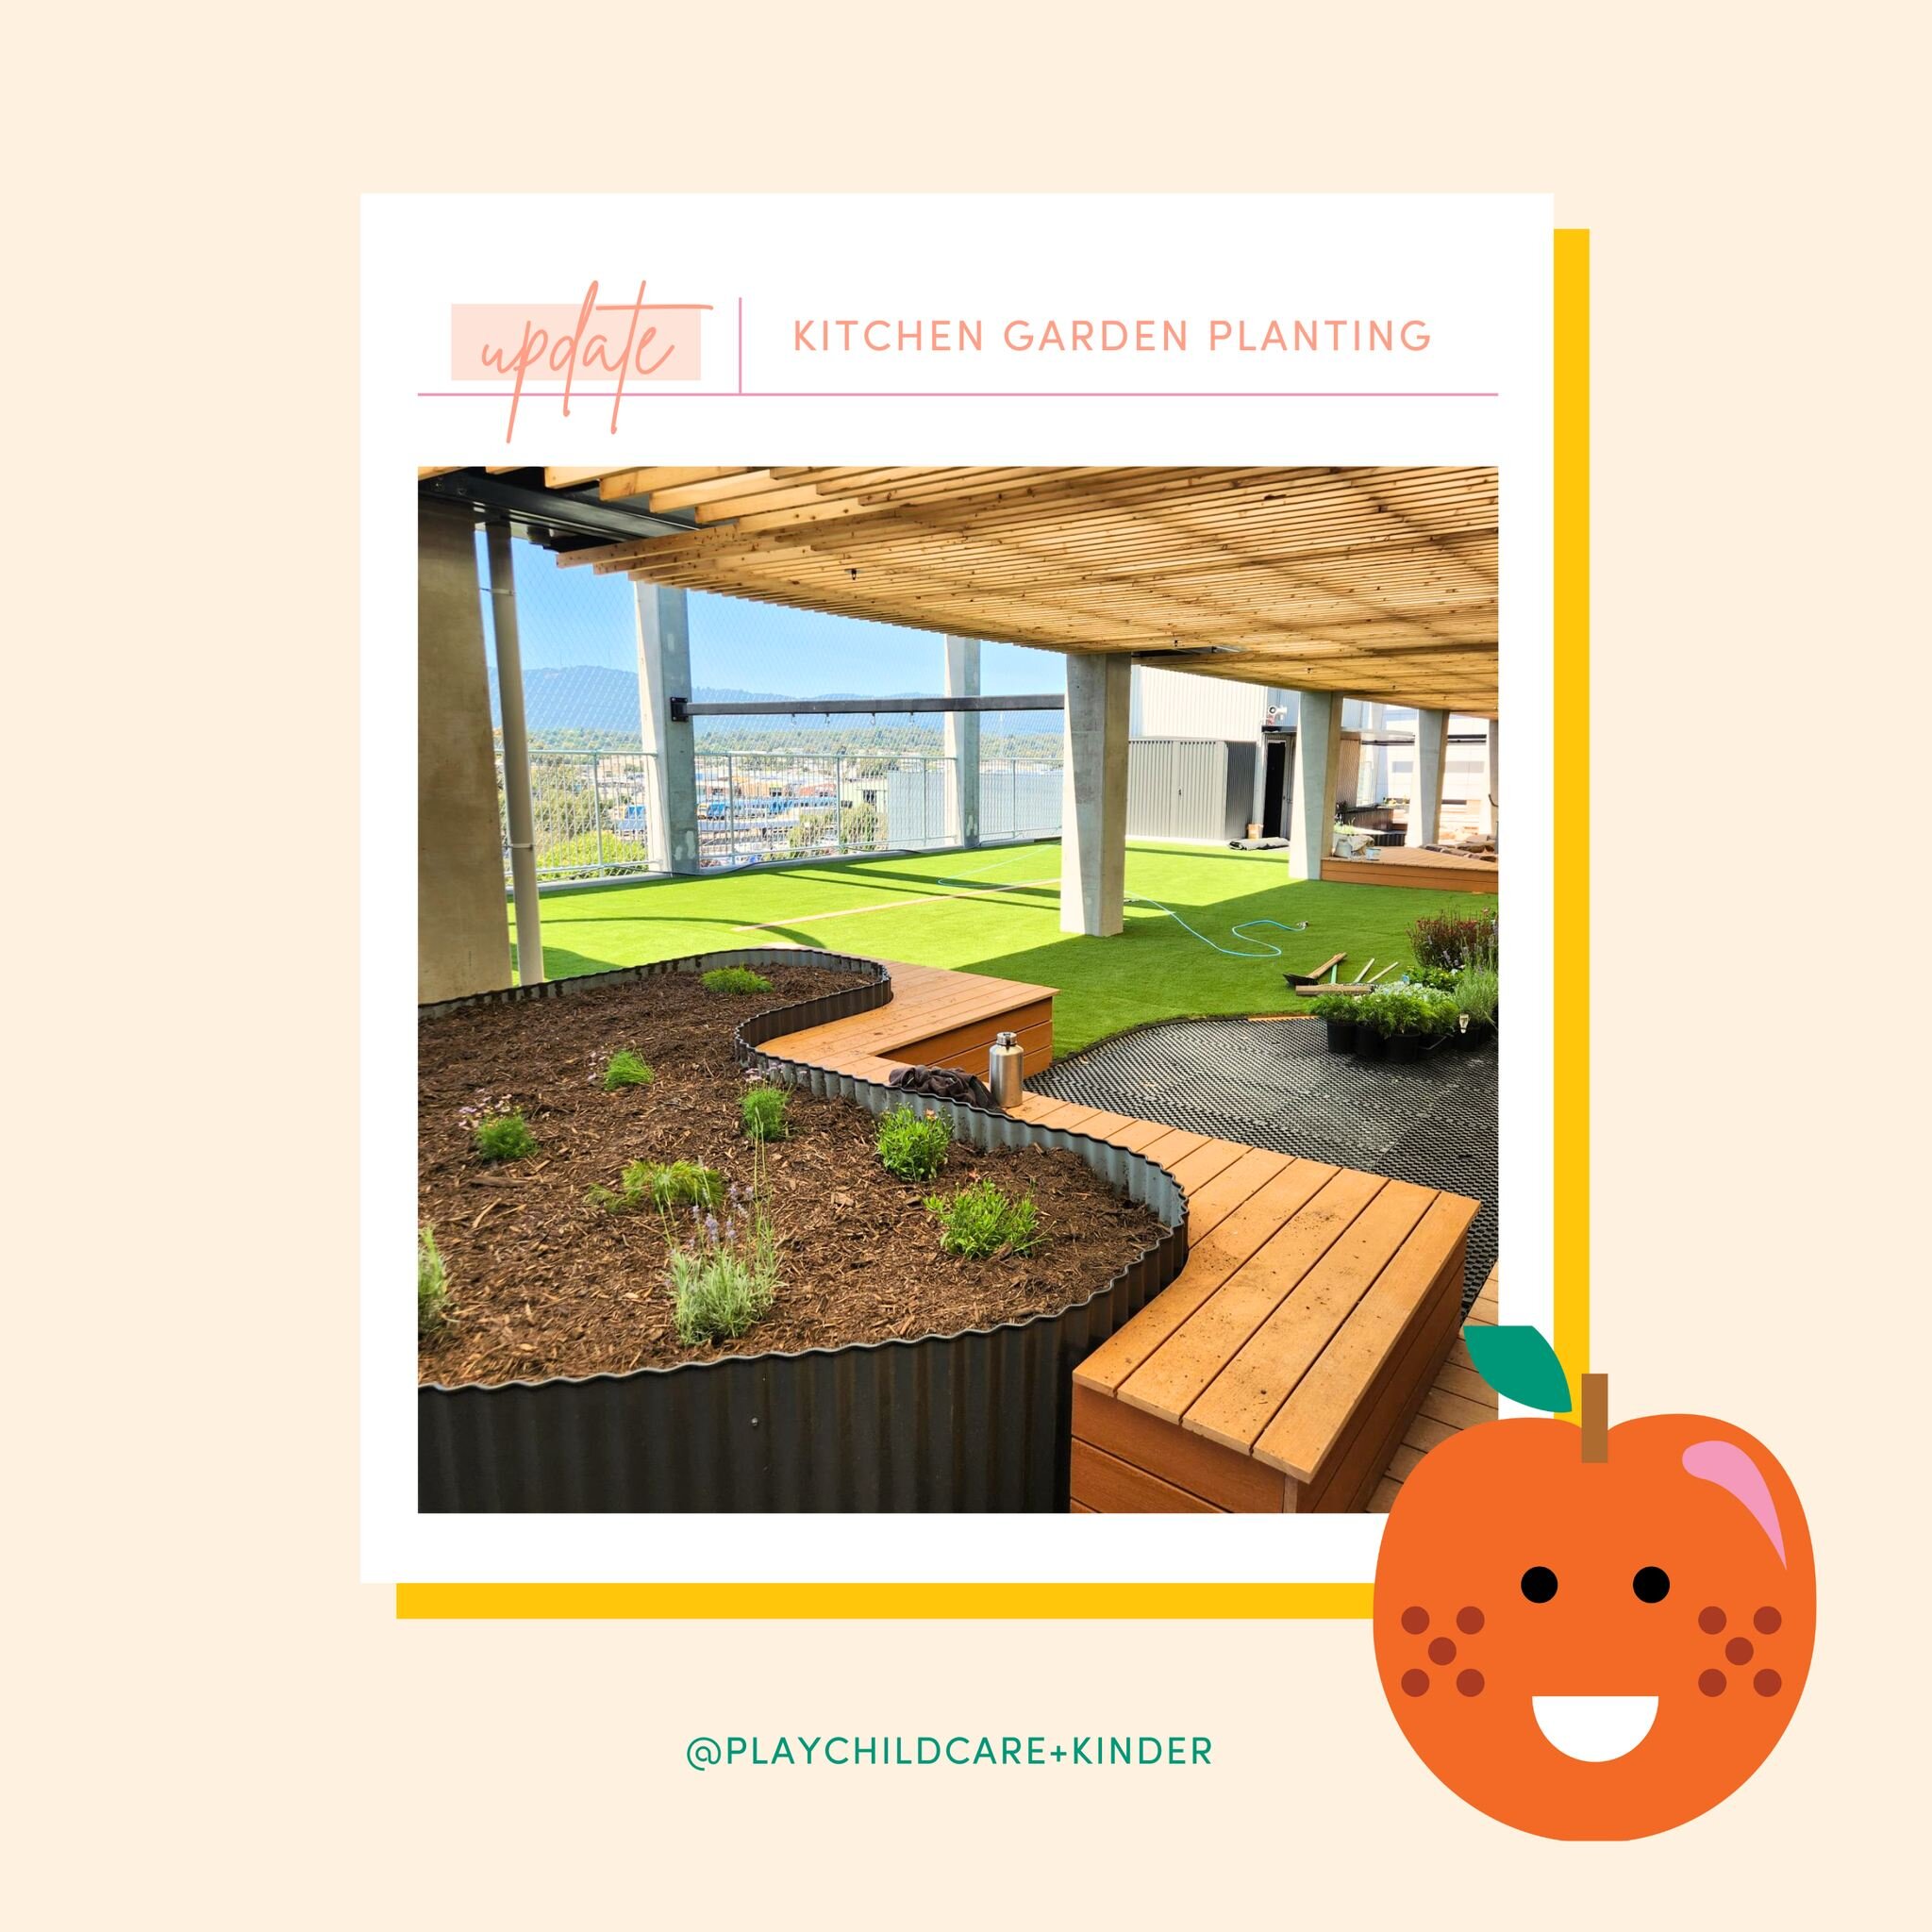 Our Children&rsquo;s Kitchen Garden is starting to bloom!

We are so excited to be able to create this Kitchen Garden and share our passion for local and homegrown produce. When children understand where their food comes from, and how they can grow t